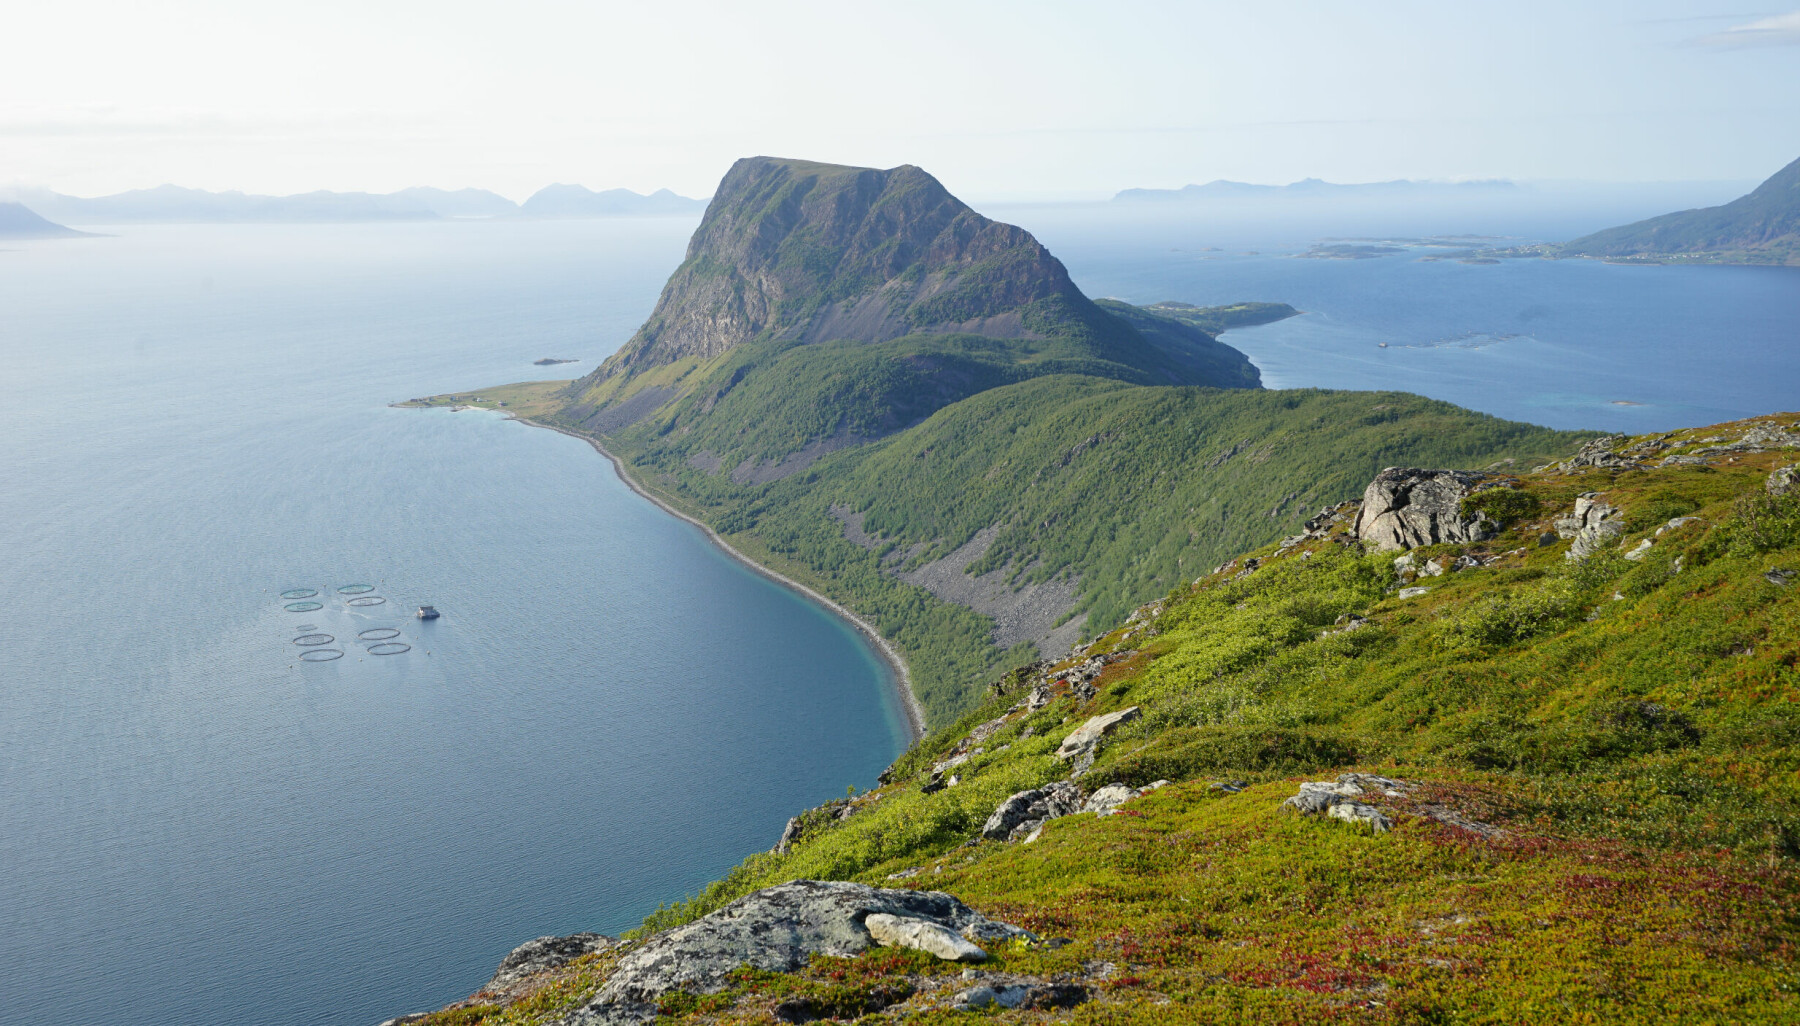 The,Beautiful,Landscape,In,The,Nothern,Lofoten.,This,Place,Is